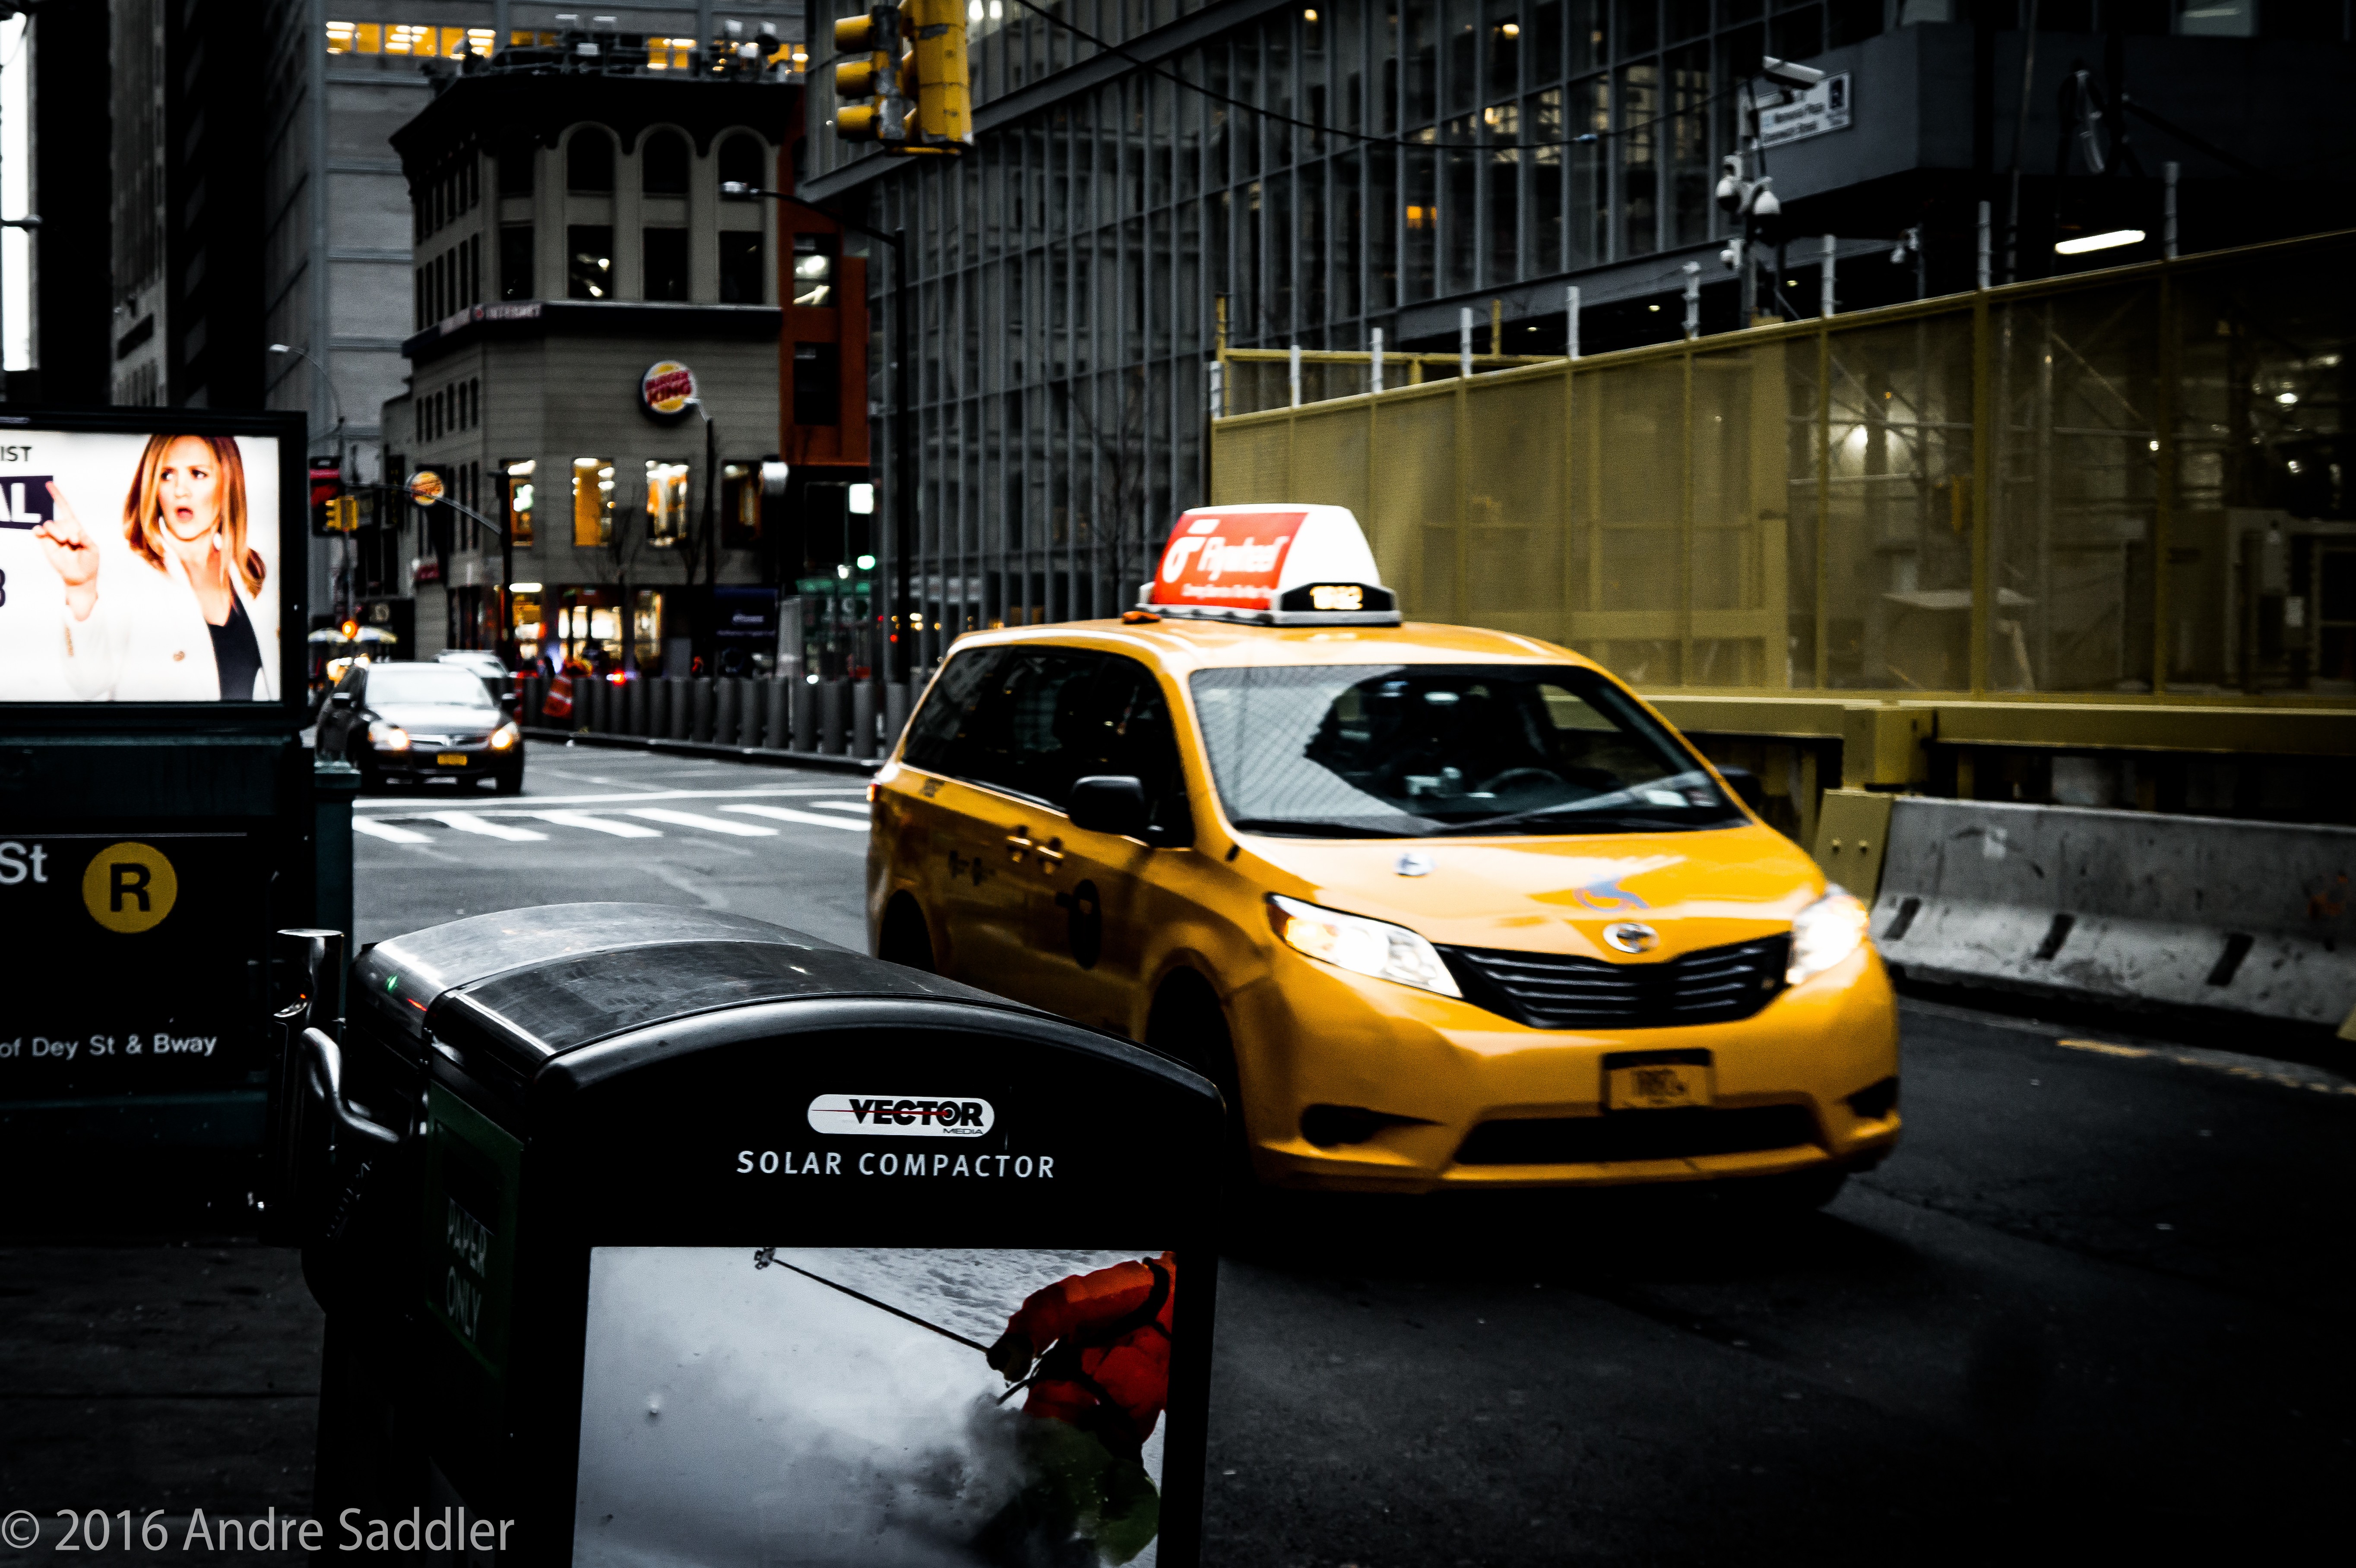 General 5456x3632 car street urban taxi city 2016 (year) New York City USA vehicle yellow cars watermarked